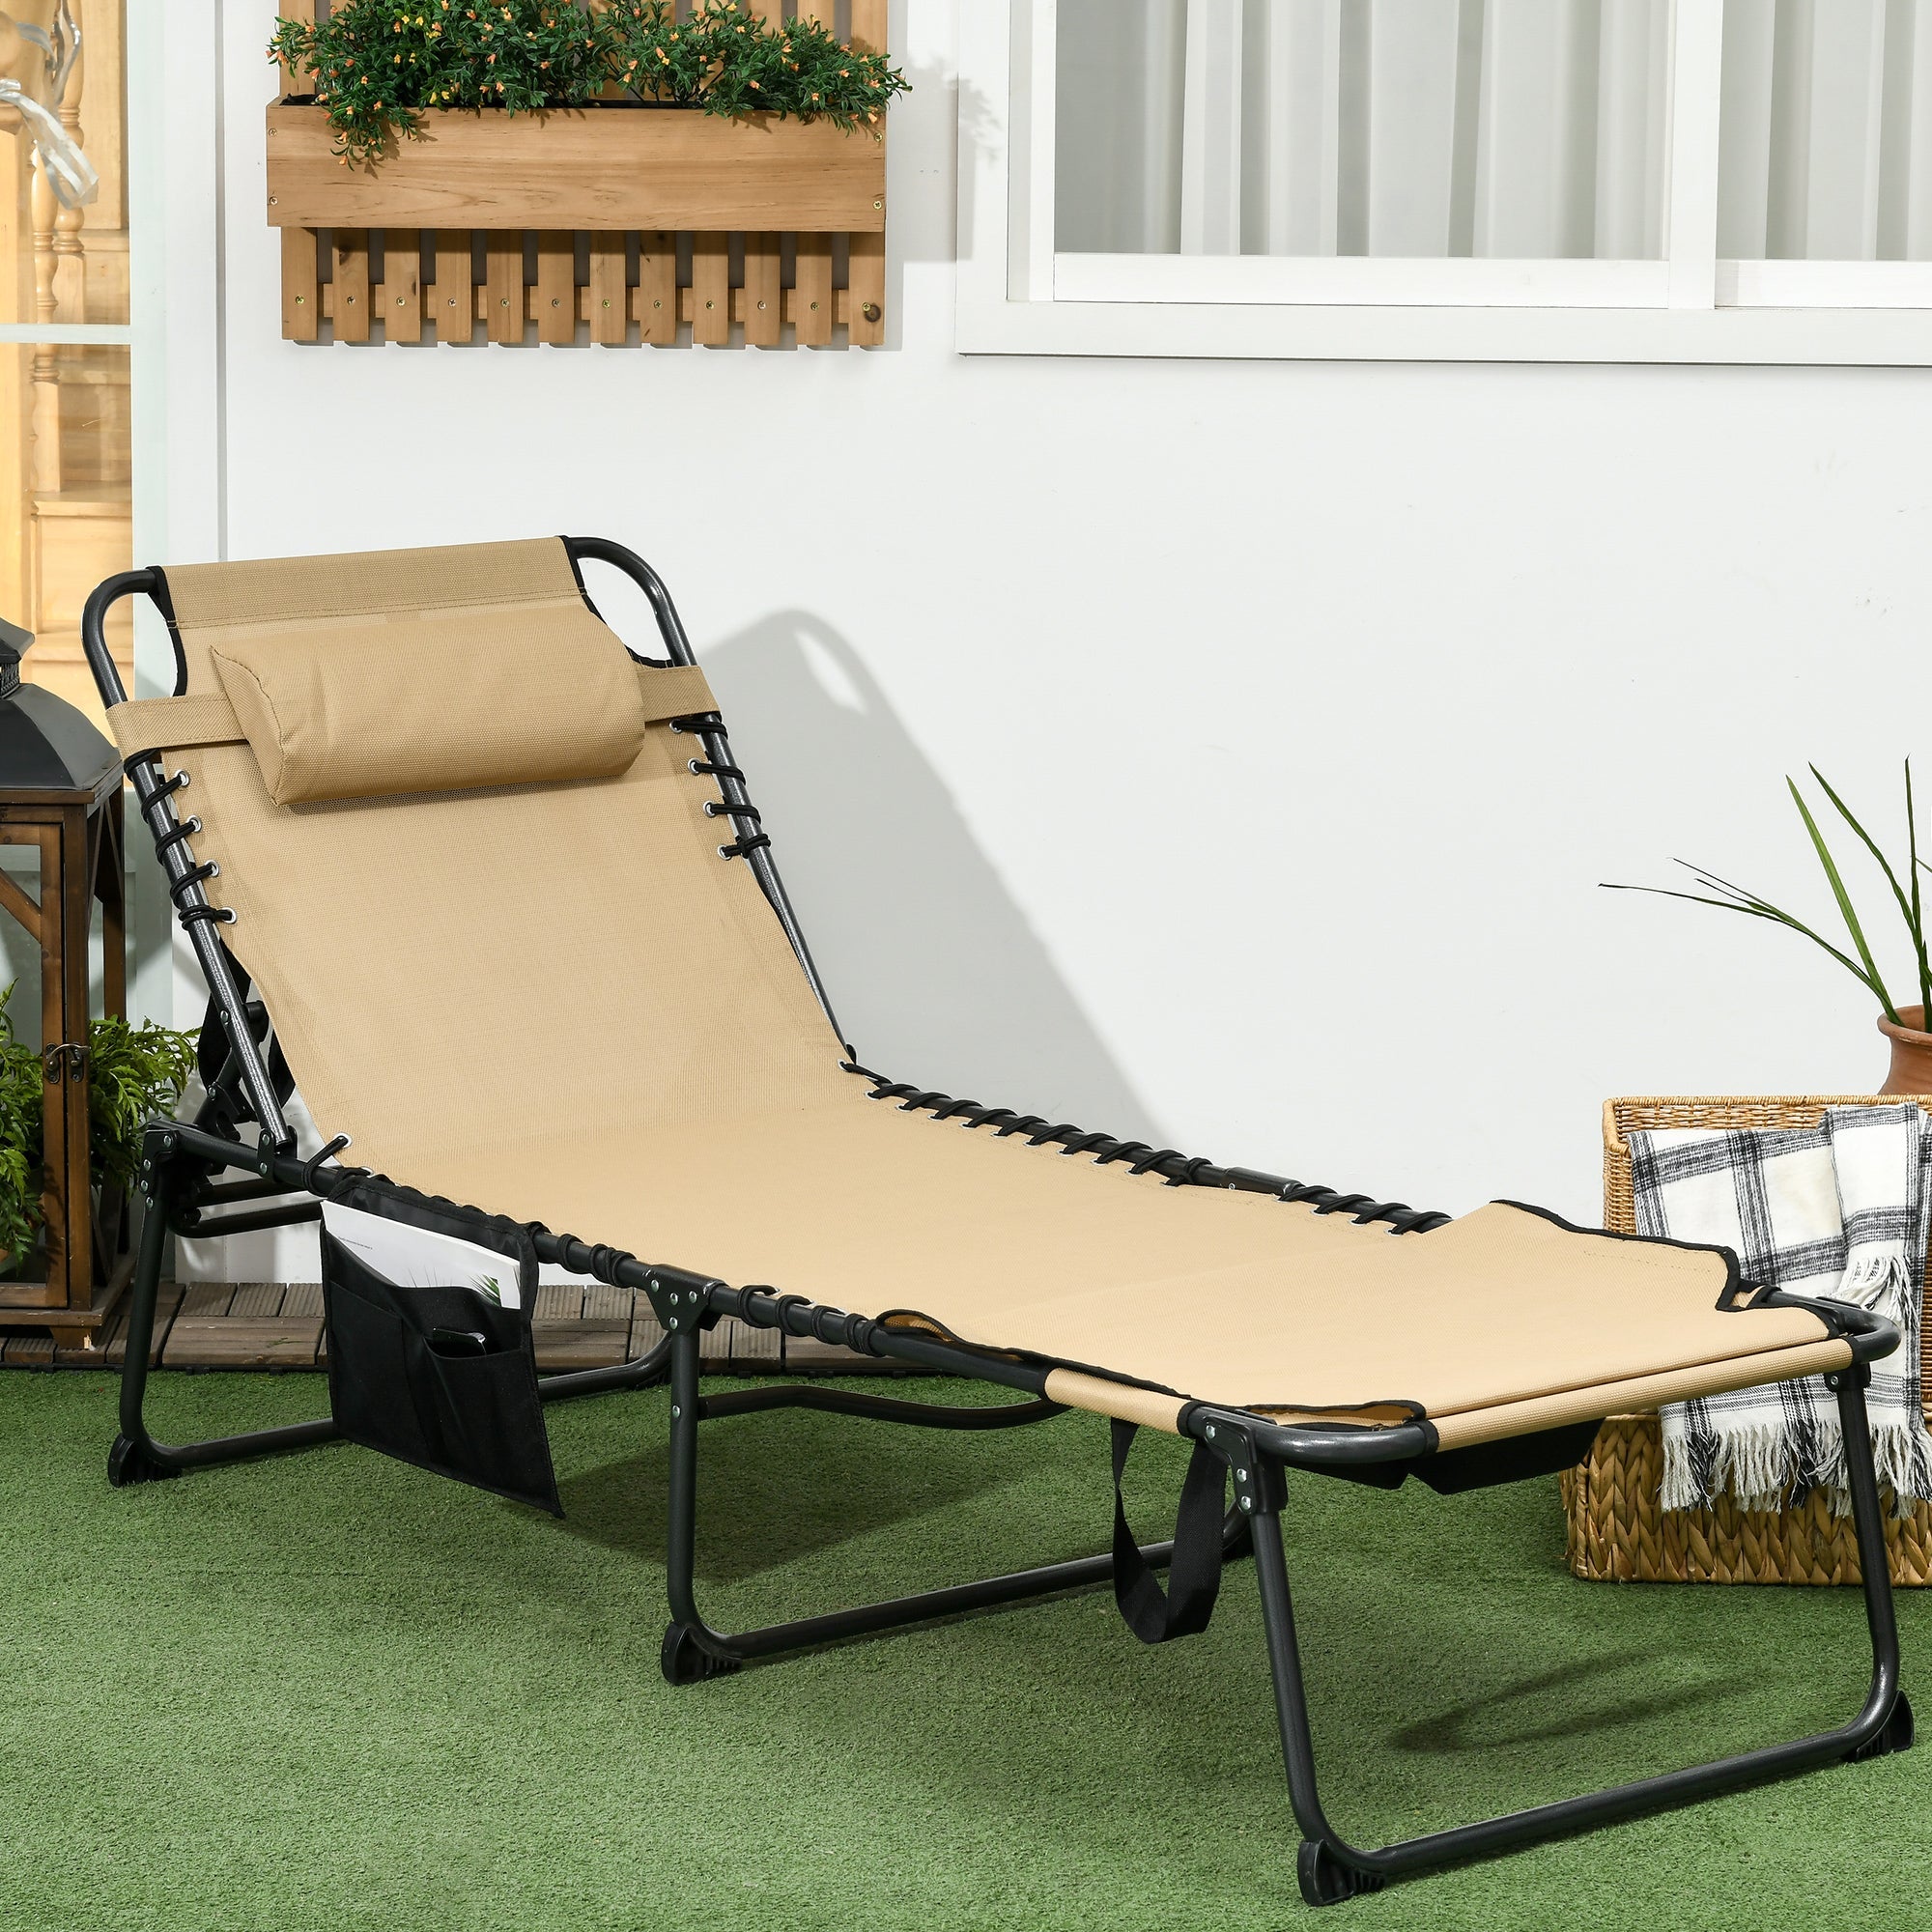 Folding Sun Lounge with 5-level Reclining Back, Outdoor Tanning Chair with Reading Hole, Outdoor Sun Lounge with Side Pocket, Headrest, for Beach, Yard, Patio, Beige-1